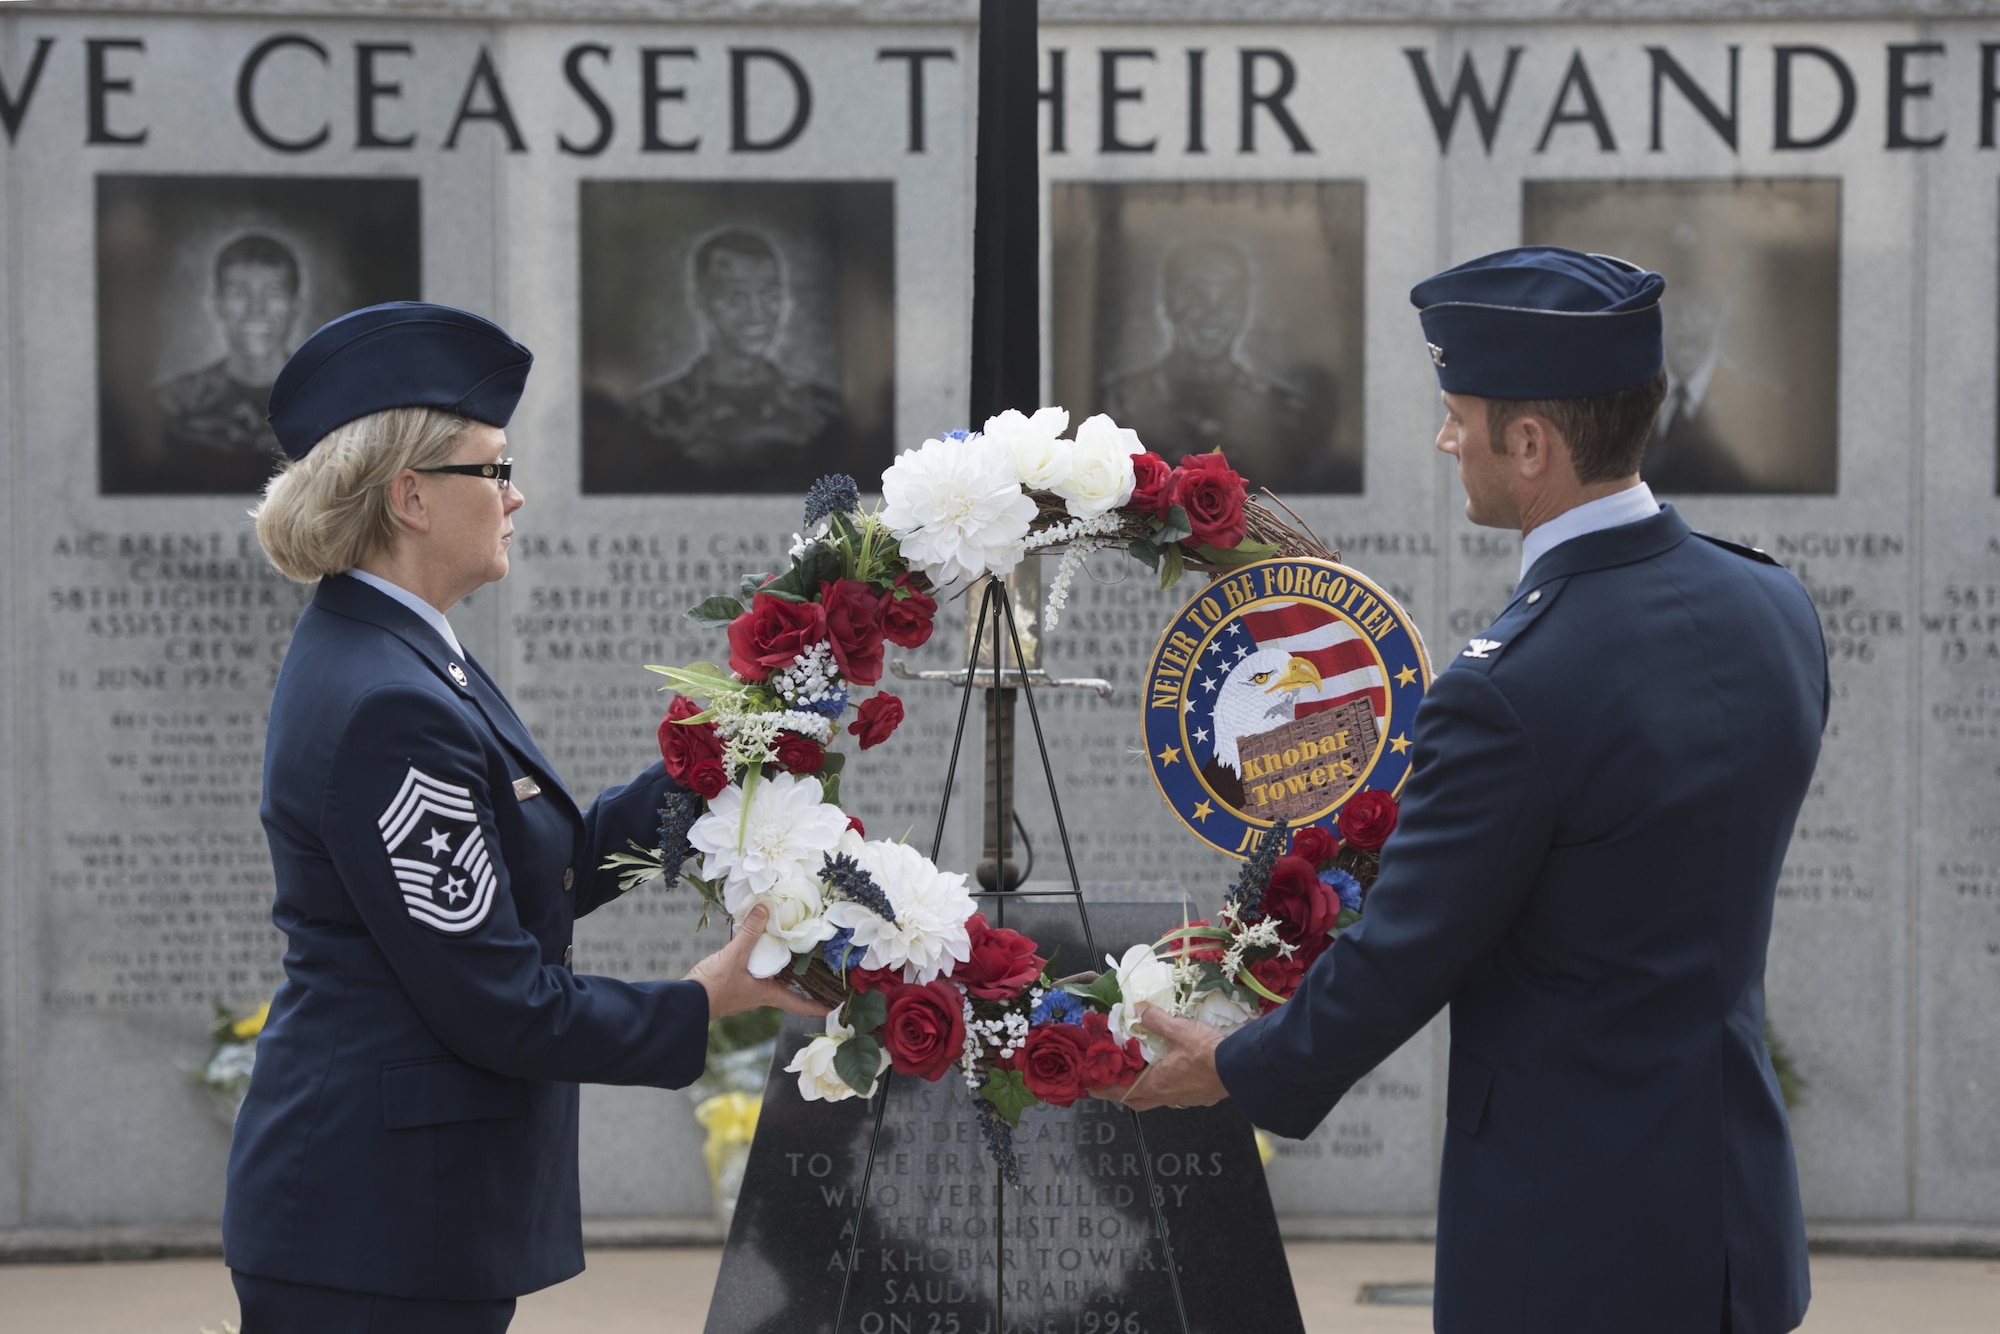 U.S. Air Force Col. Paul Moga, 33rd Fighter Wing commander, right, and Chief Master Sgt. Shelley Cohen, 307th Bomb Wing command chief, place a wreath in front of the burning sword during the Khobar Towers 21st Anniversary Wreath Laying Ceremony June 23, 2017, at Eglin Air Force Base, Florida. On June 25, 1996, a bomb was detonated near the Khobar Towers housing complex in Dhahran, Saudi Arabia. Nineteen Airmen were killed and more than 400 U.S. and international military and civilians were injured in the blast.  Of the 19 killed, 12 were Nomads. Each year the 33 FW holds a ceremony in remembrance of that day. (U.S. Air Force photo by Staff Sgt. Peter Thompson)